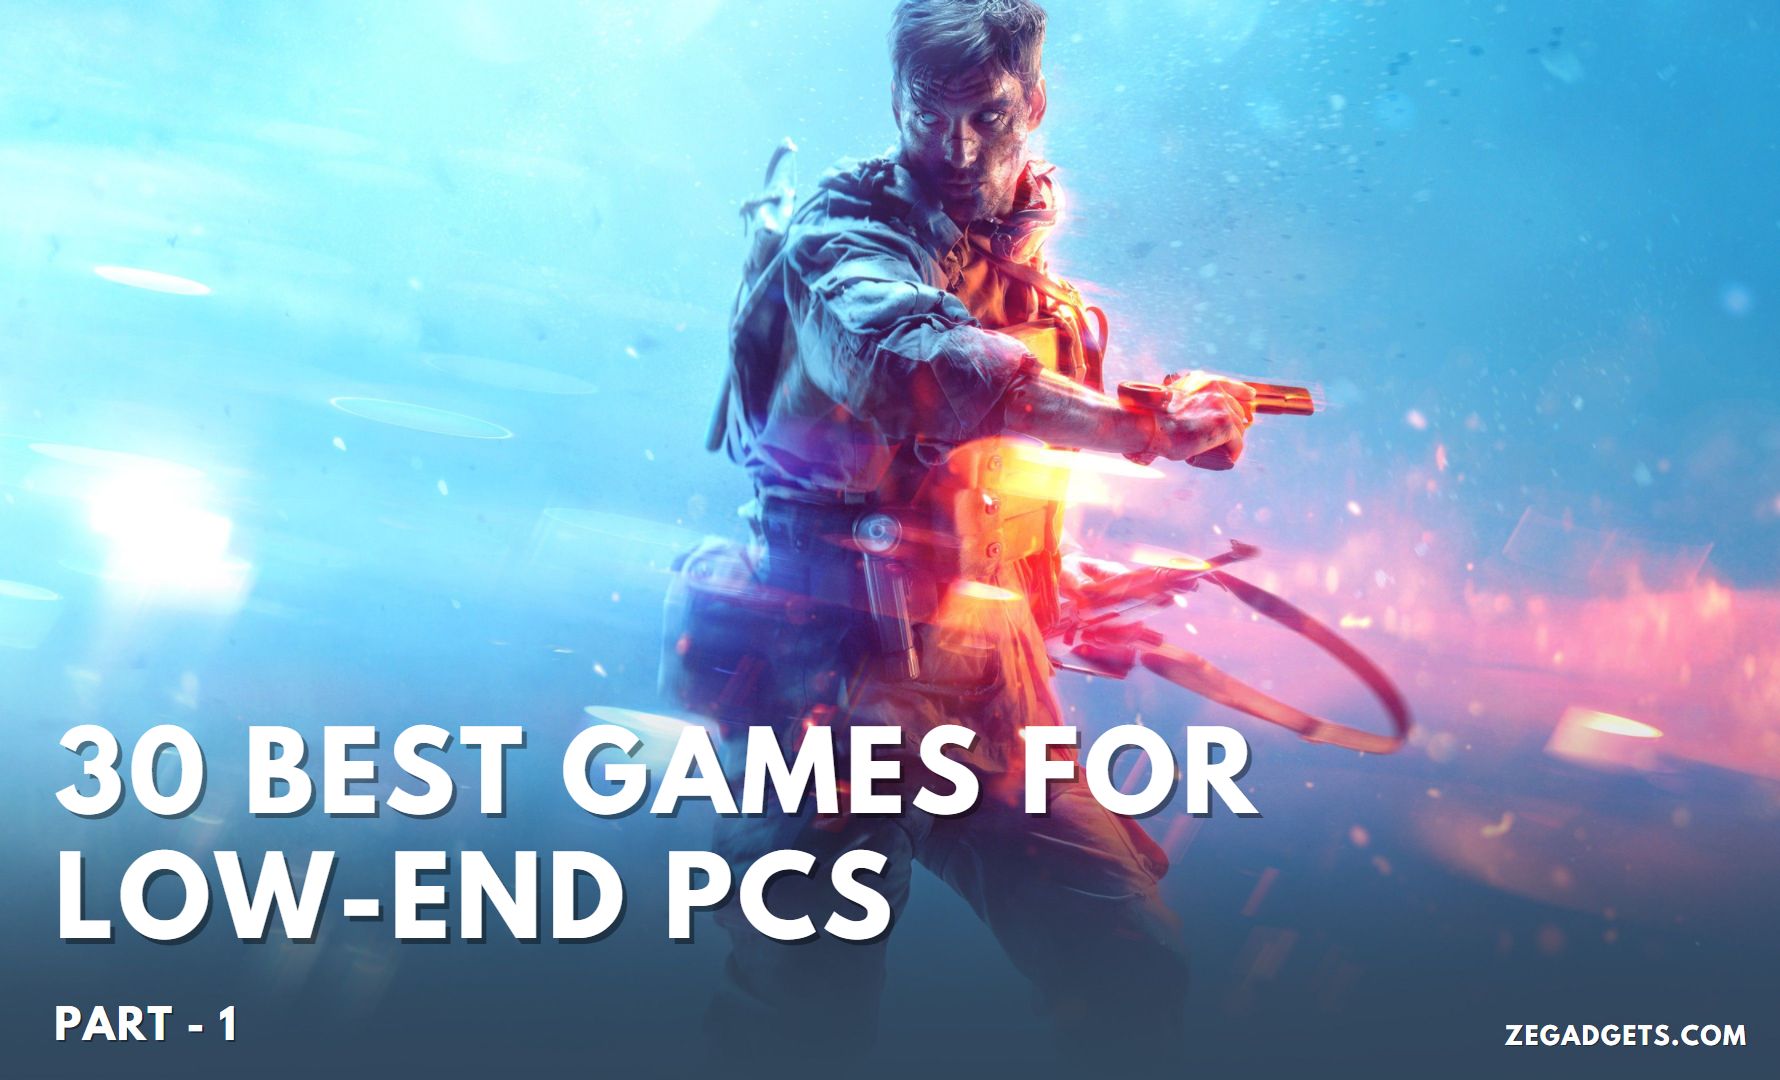 5 of the best games for low-end PCs